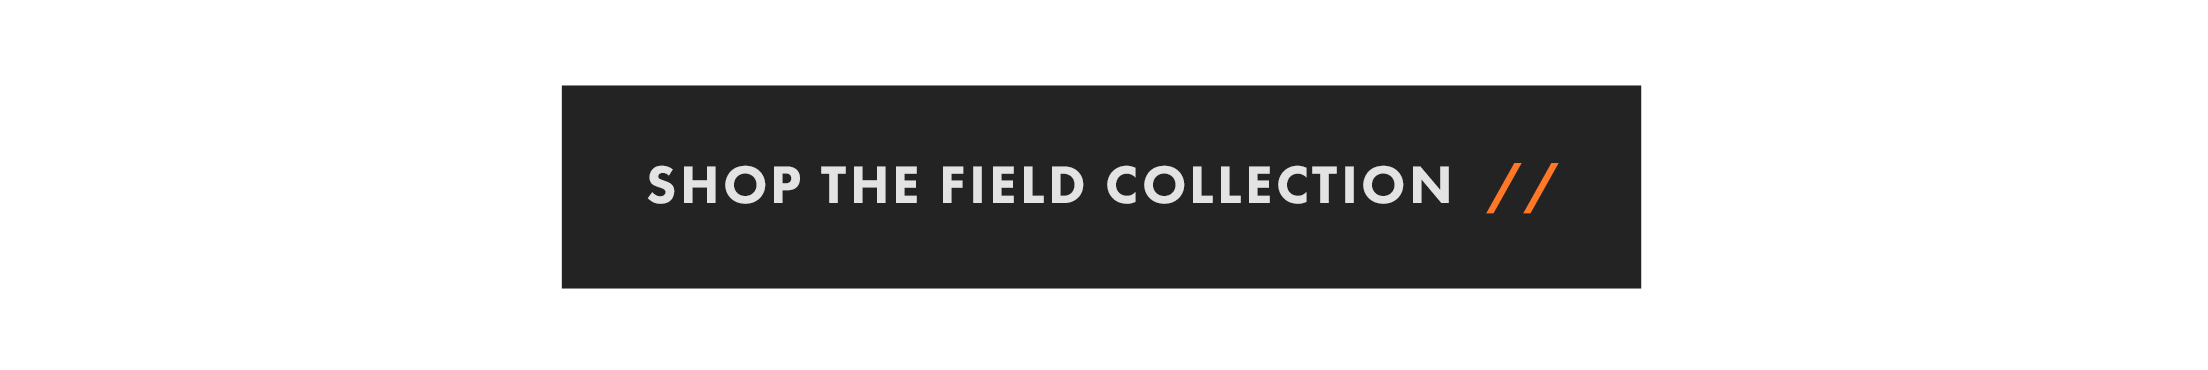 Shop the Field Collection